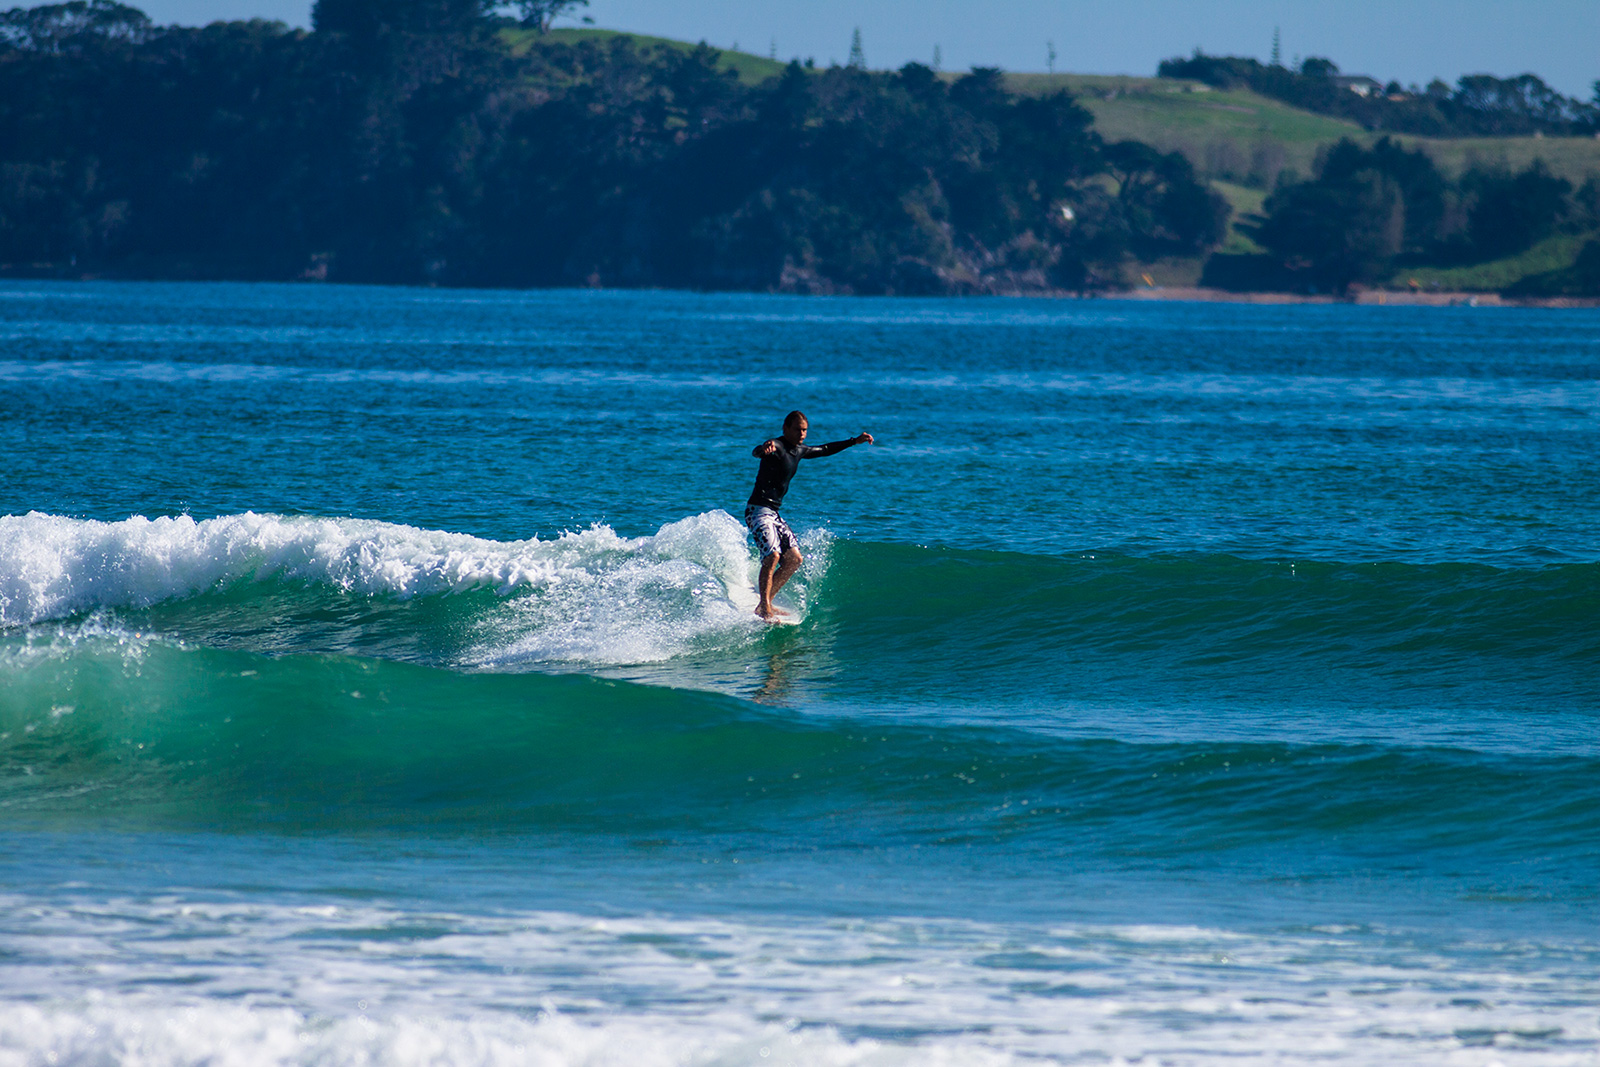 Visit the Tutukaka Coast in Northland for get beaches and surfing.